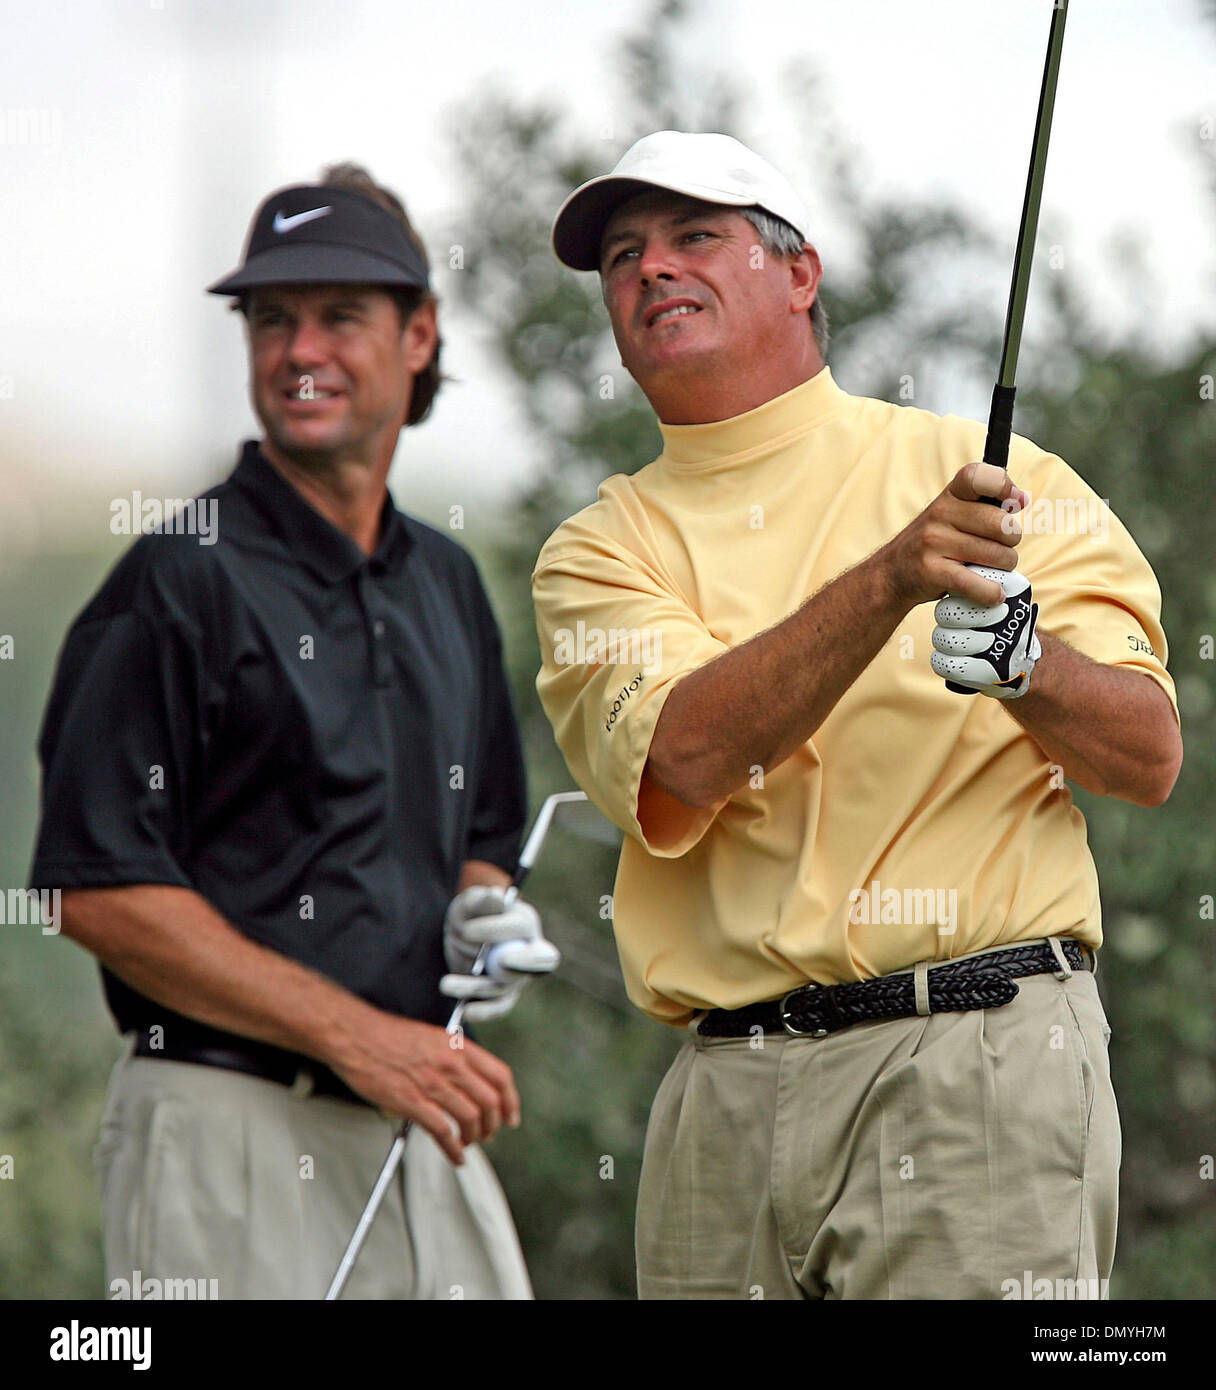 Sep 22, 2006; San Antonio, TX, USA; Paul Goydos watches his ball flight on number 17 along with playing partner Paul Azinger Friday at La Cantera during the second round of the Valero Texas Open.   Goydos shot a 63 to take the lead early in the day.  Mandatory Credit: Photo by Tom Reel/San Antonio Express-News/ZUMA Press. (©) Copyright 2006 by San Antonio Express-News Stock Photo